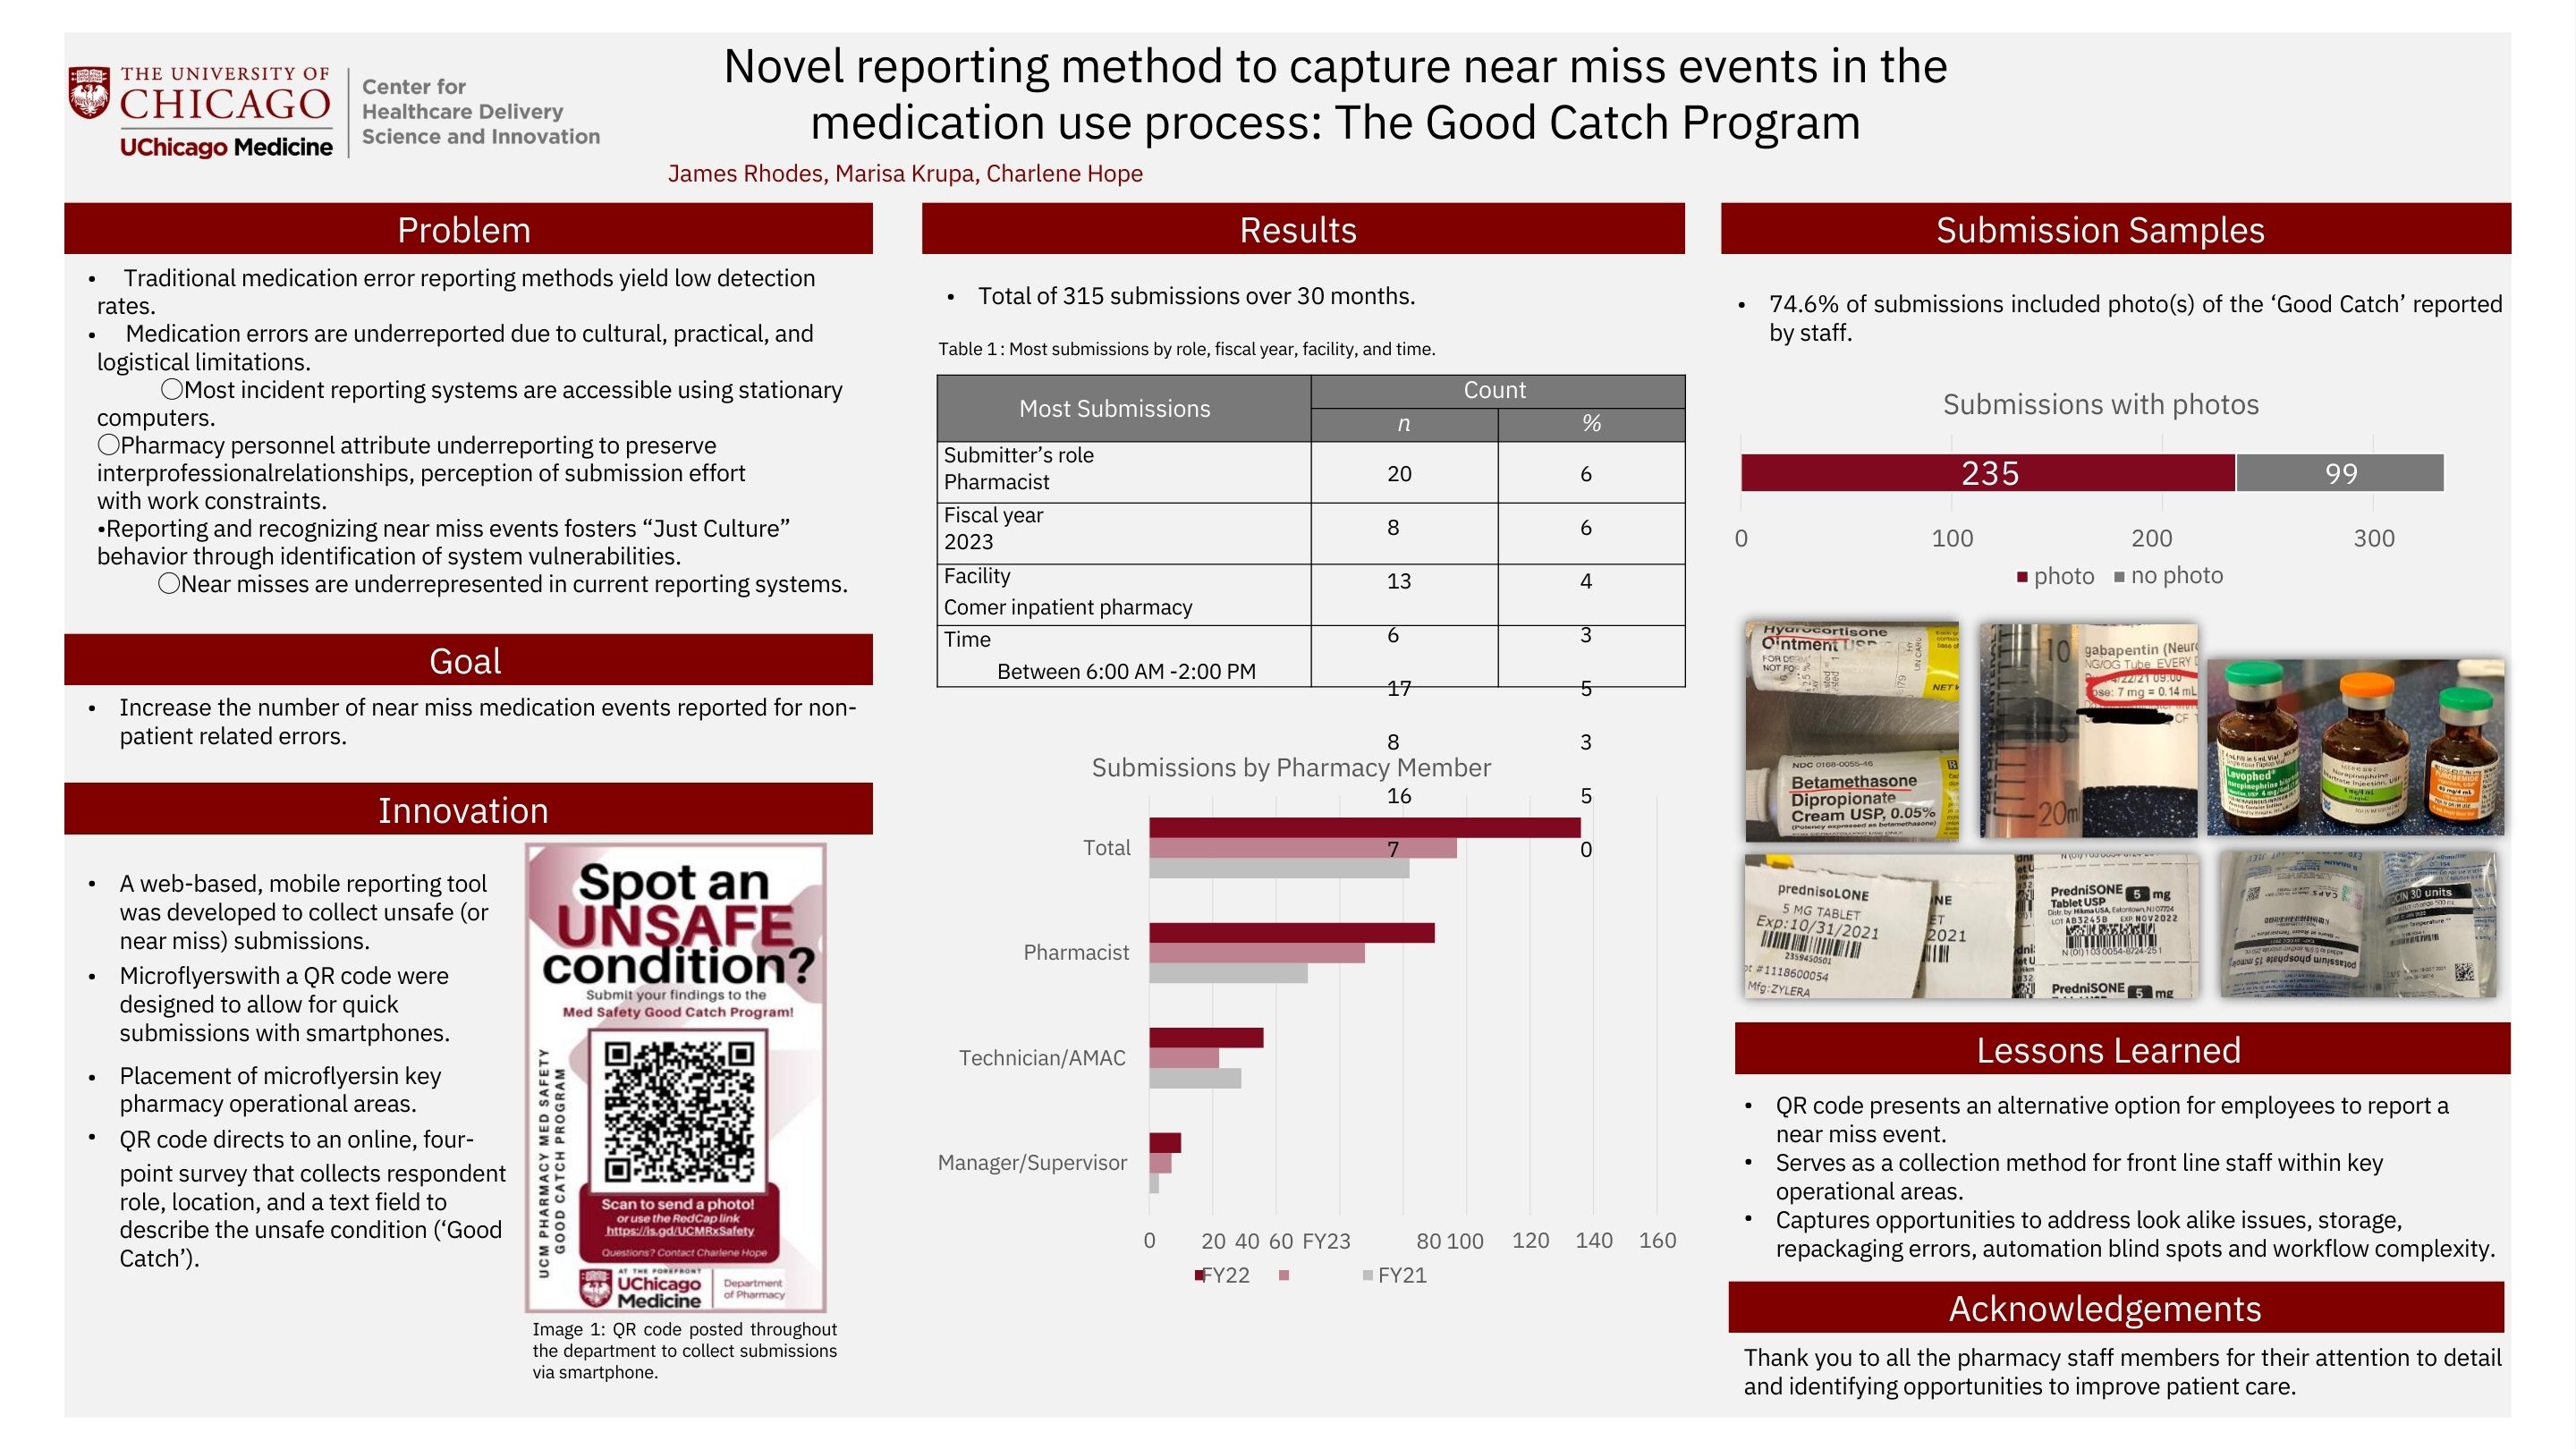 RHODES_Novel reporting method to capture near miss events in the medication use process- The Good Catch Program